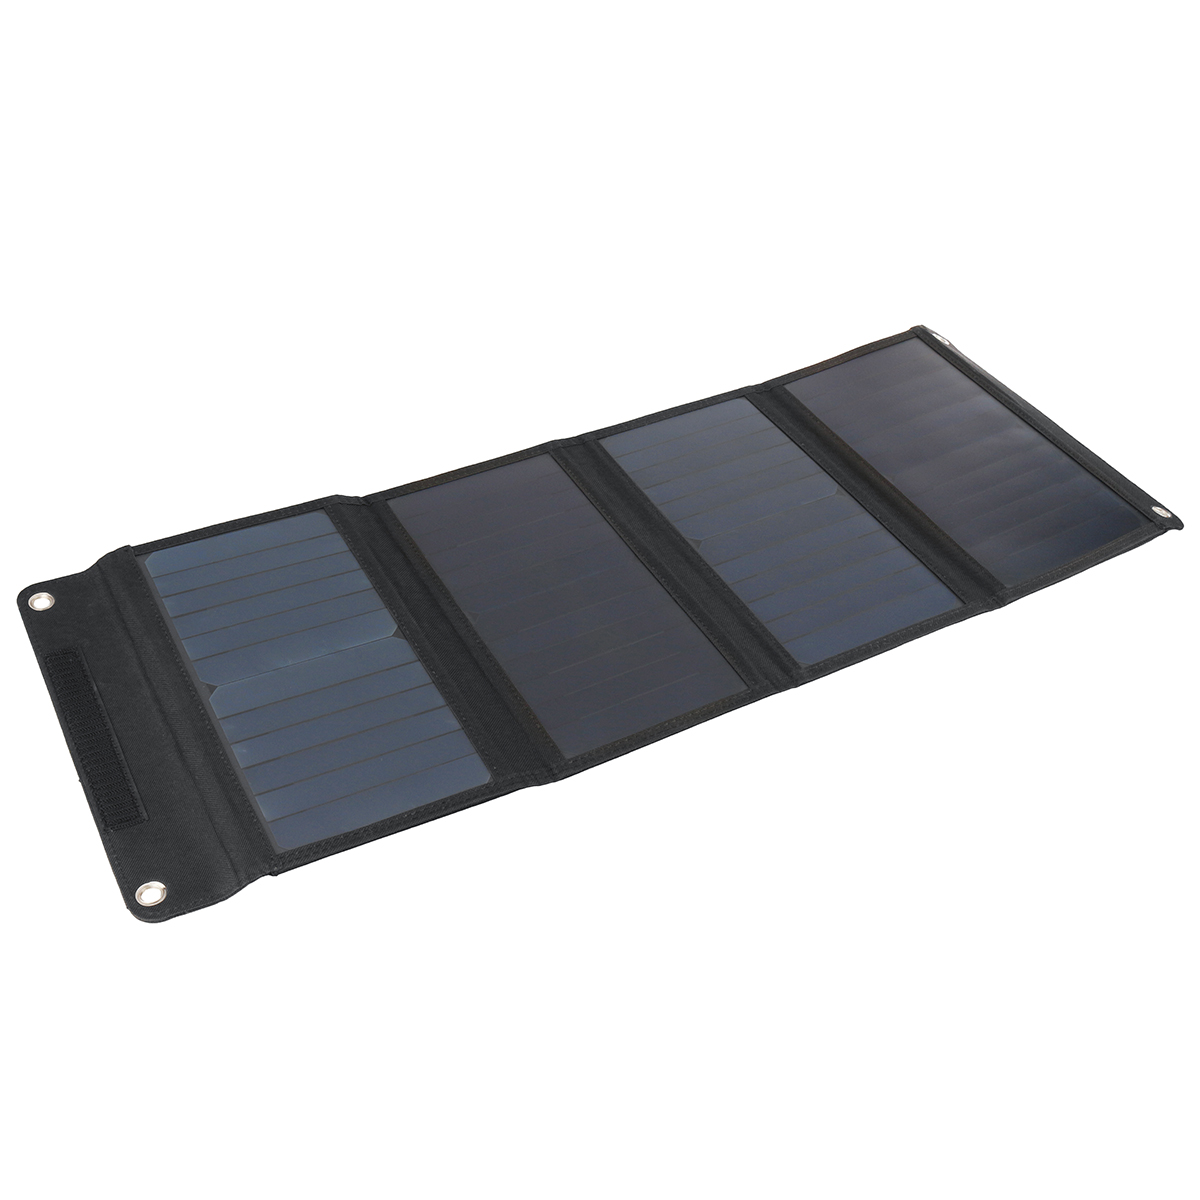 LEORY 28W 12V Flodable Solar Panel Sunpower Cell Panel Solar Charger Generator for Smartphone Tablet Light Power Bank Outdoor